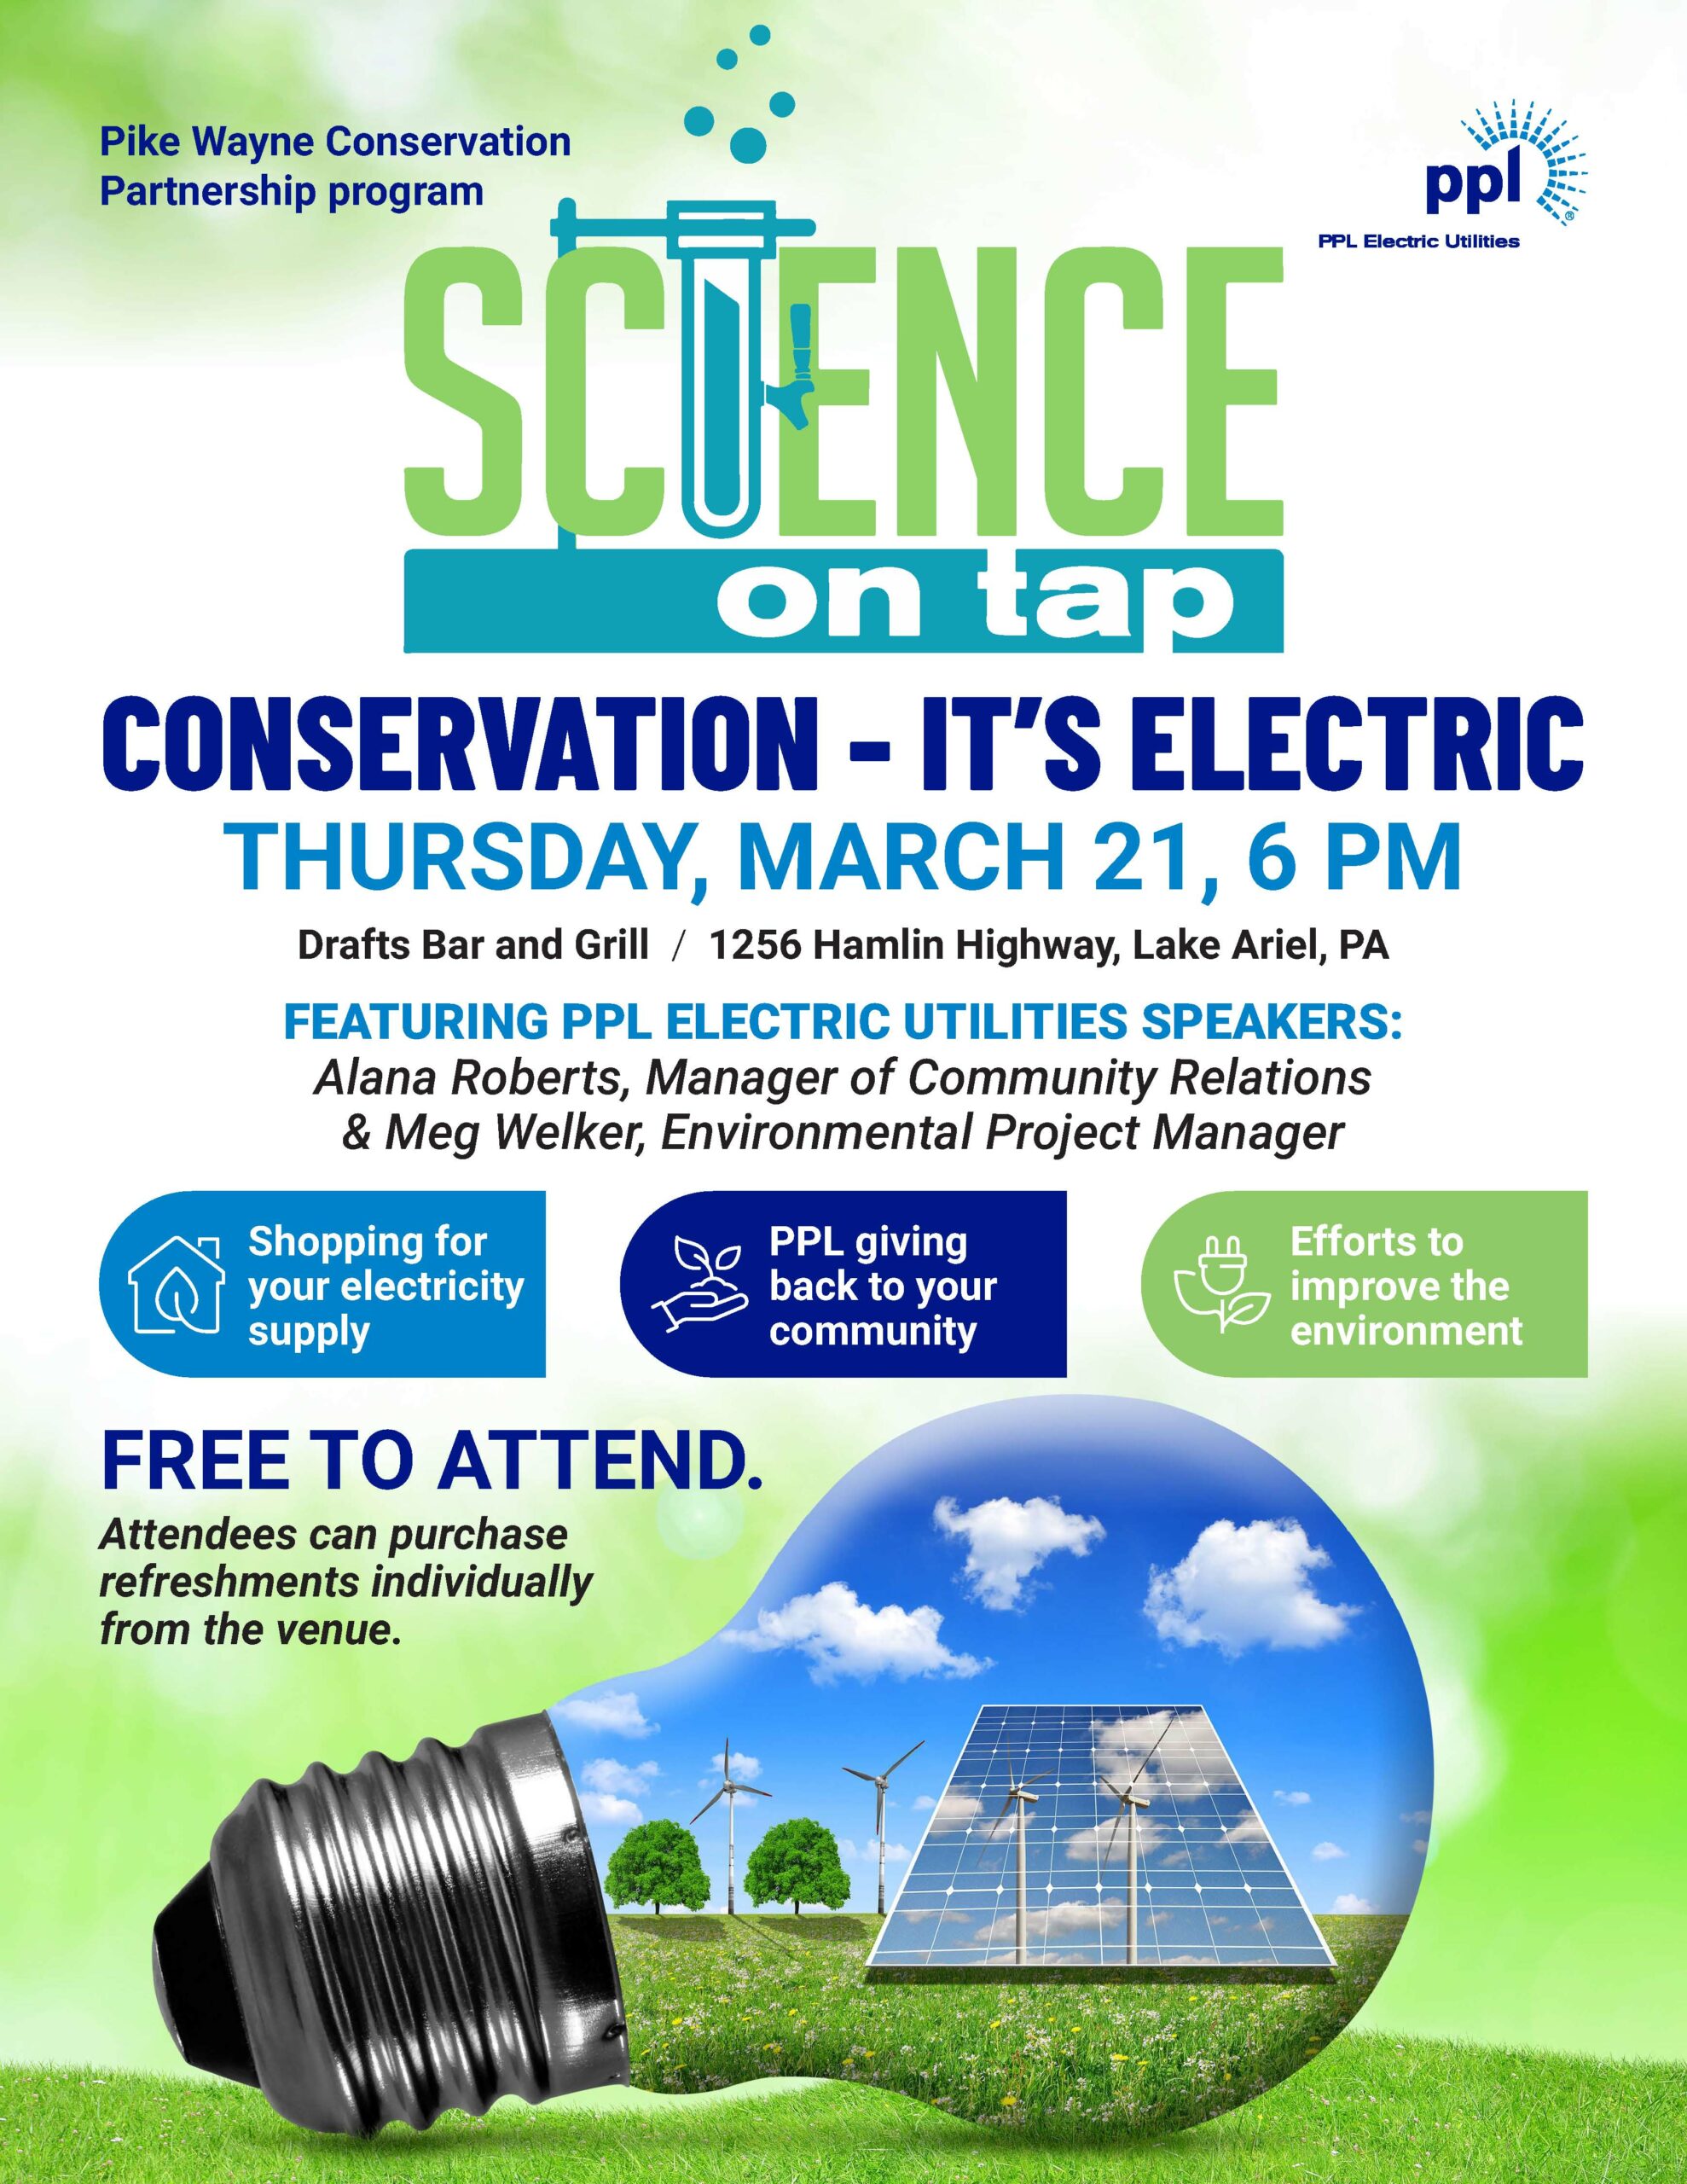 Flyer for the March Science on Tap program "Conservation- It's Electric;" Thursday, March 21, 6pm at Drafts Bar and Grill at 1256 Hamlin Highway, Lake Ariel, PA. Featuring PPL Electric Utilities Speakers: Alana Roberts, Manager of Community Relations and Meg Welker, Environmental Project Manager. Free to attend. Attendees can purchase refreshments individually from the venue. 